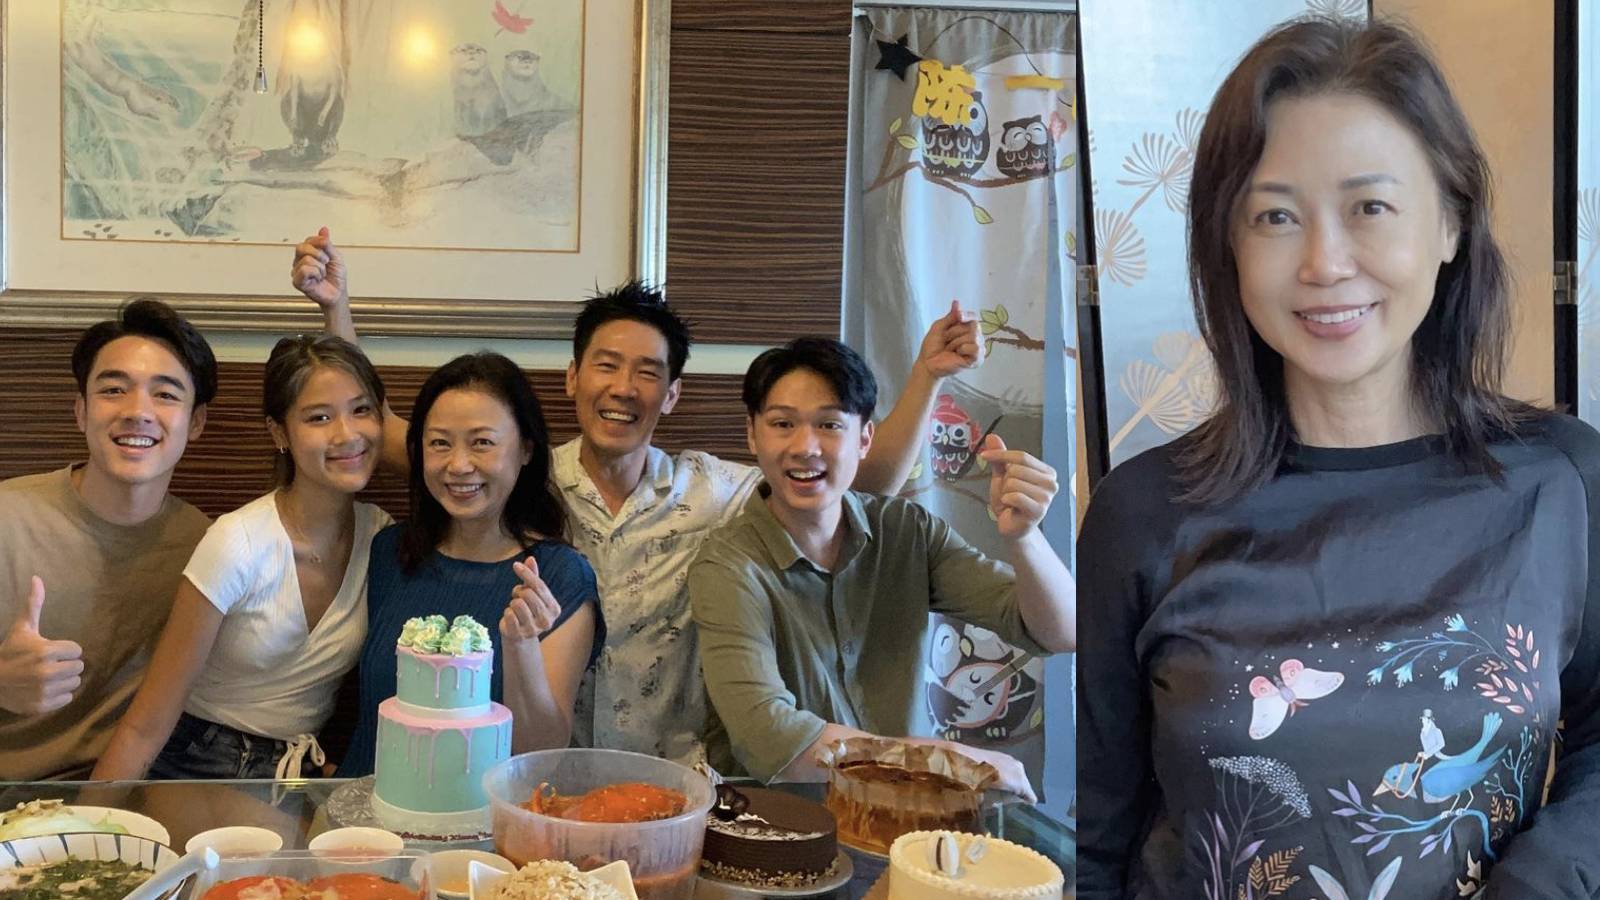 Xiang Yun Had An “Unforgettable" 60th Birthday Celebration With Her Family